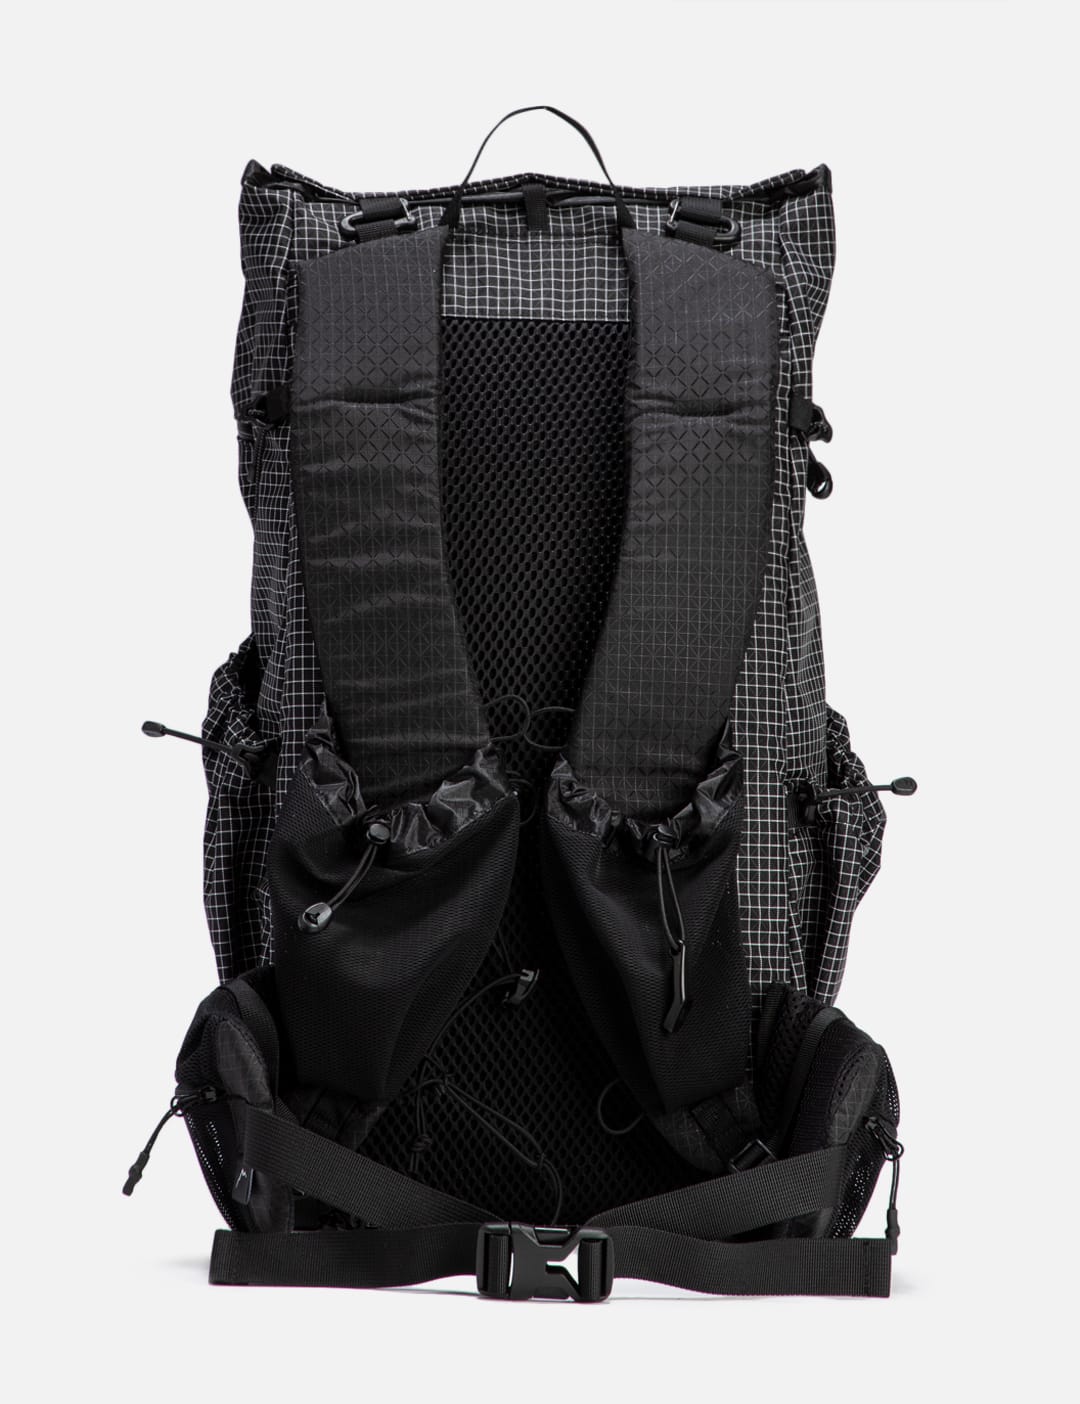 CAYL - Juheul Grid Backpack | HBX - Globally Curated Fashion and